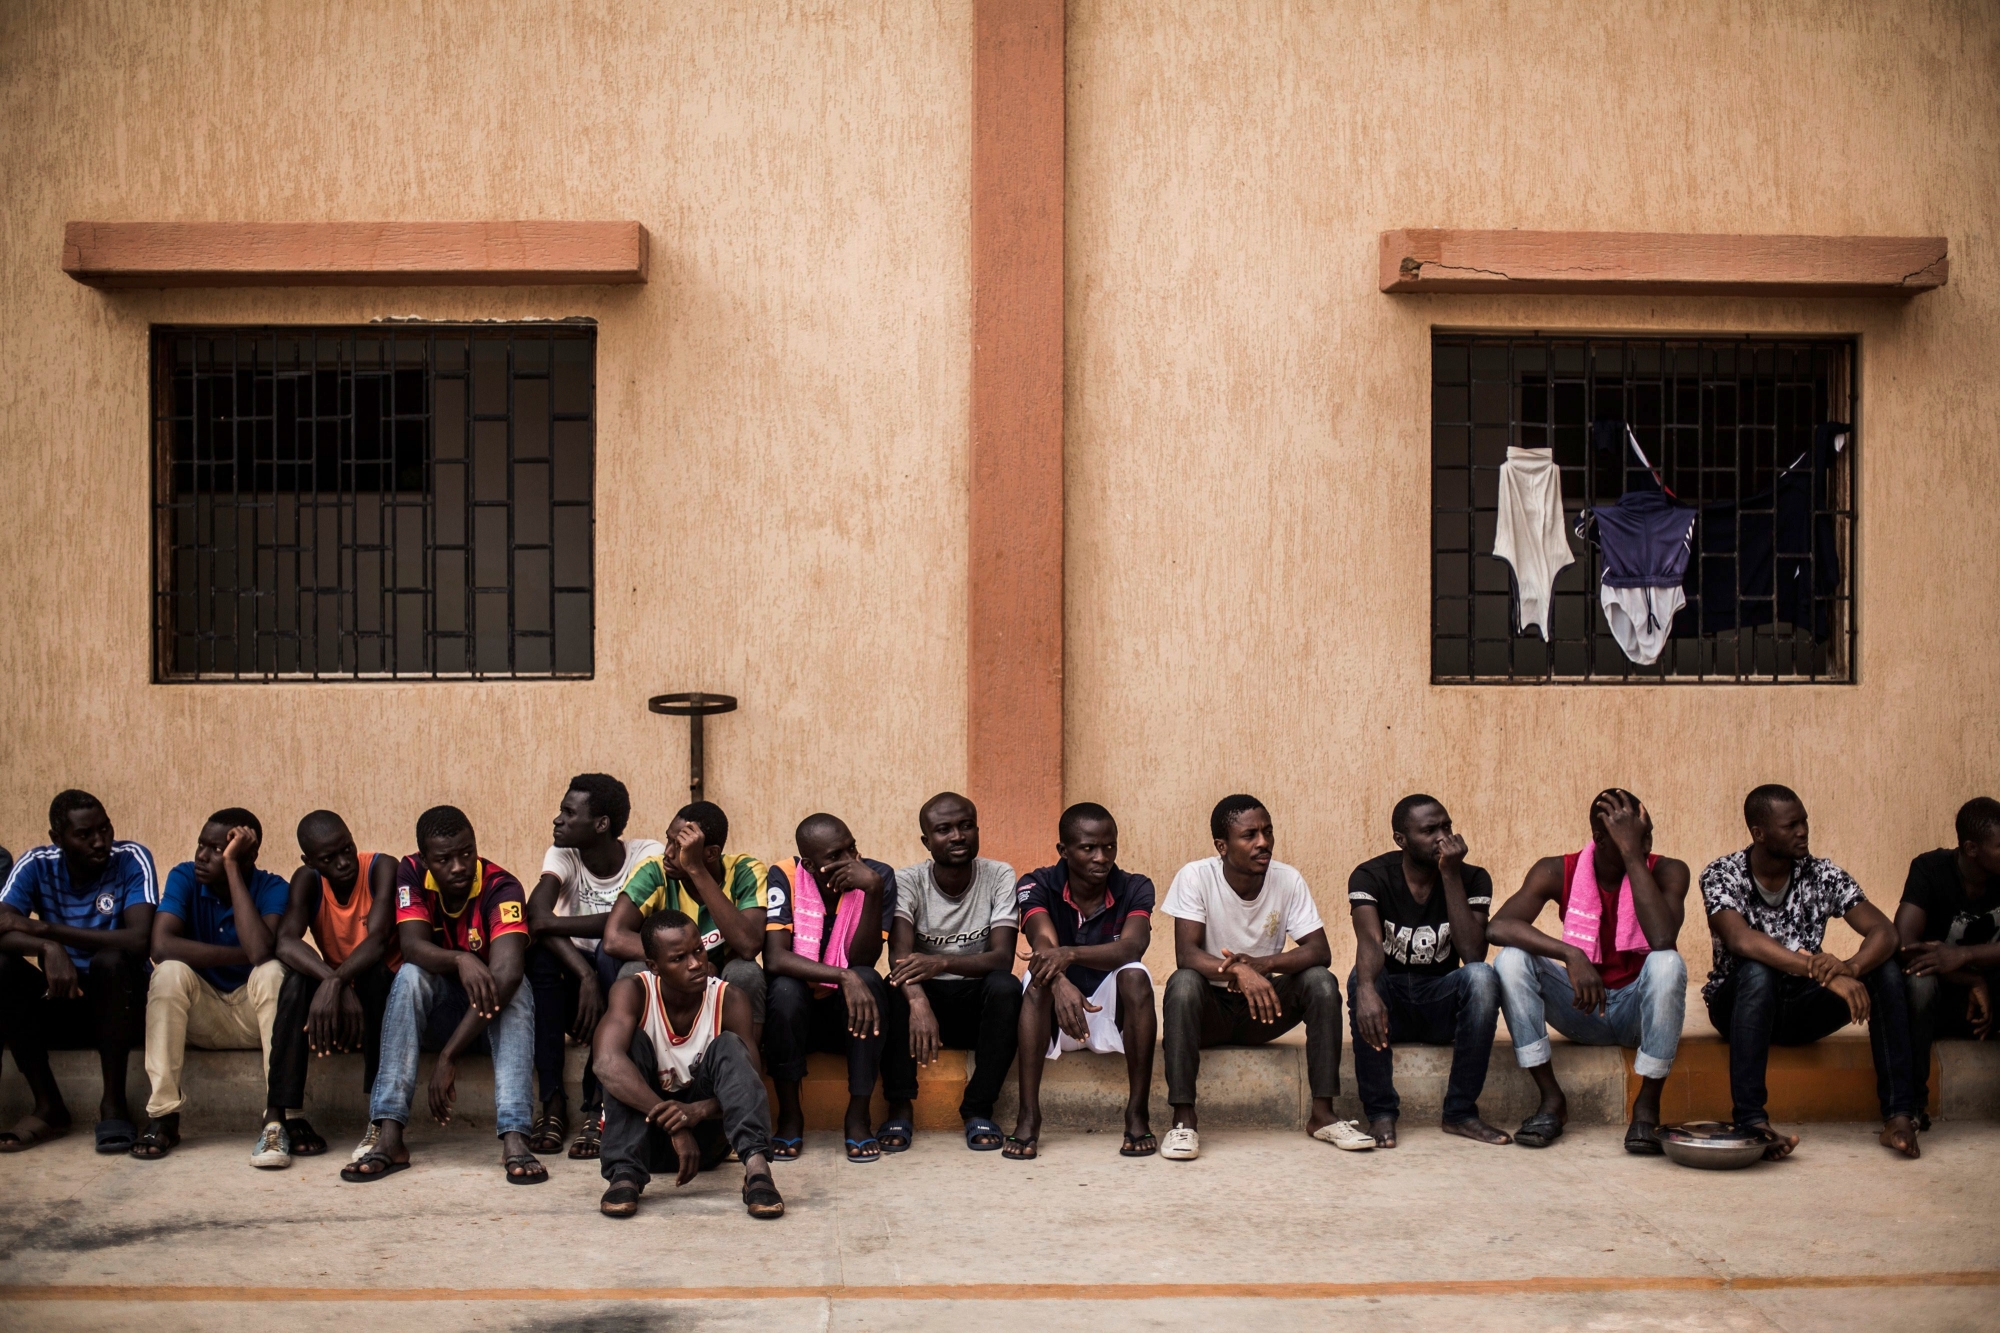 Migrants wait to get in their barracks after having lunch in the courtyard of a detention center for migrants, in the village of Karareem, around 50 km from Misrata, Libya, Sunday, Sept. 25, 2016. Libya is an important transit and destination country for migrants who arrive seeking employment or a path to Europe. Some 700,000 to 1 million migrants are estimated to be in the country, according to International Organization for Migration. (AP Photo/Manu Brabo) XMB101